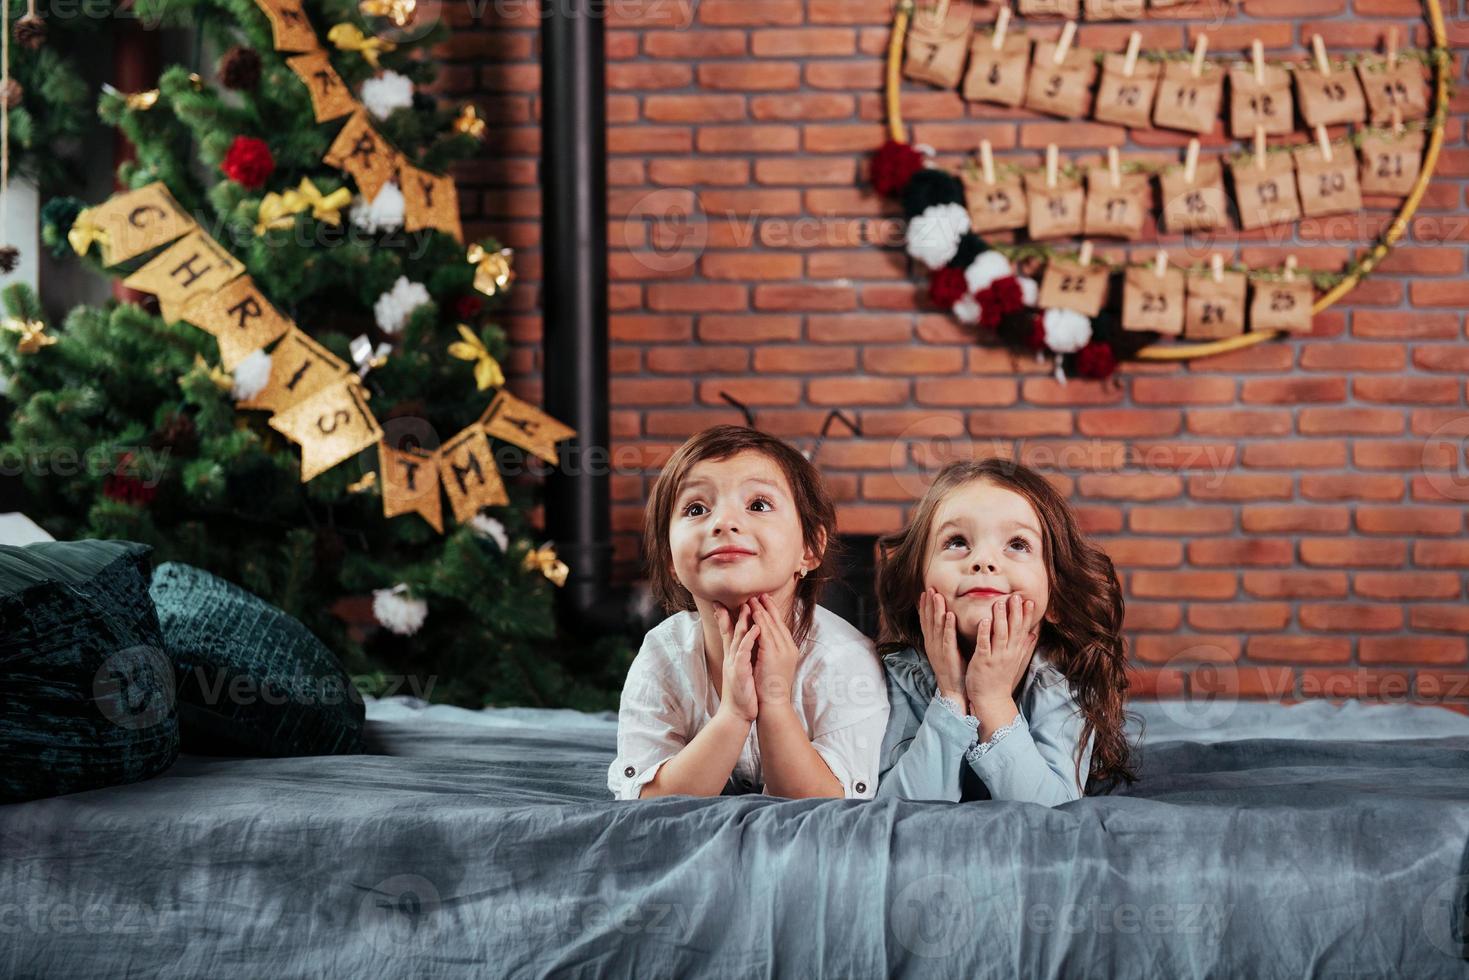 In anticipation of gifts. What they Two cheerful female kids lying on the bed with new year decorations and holiday tree photo